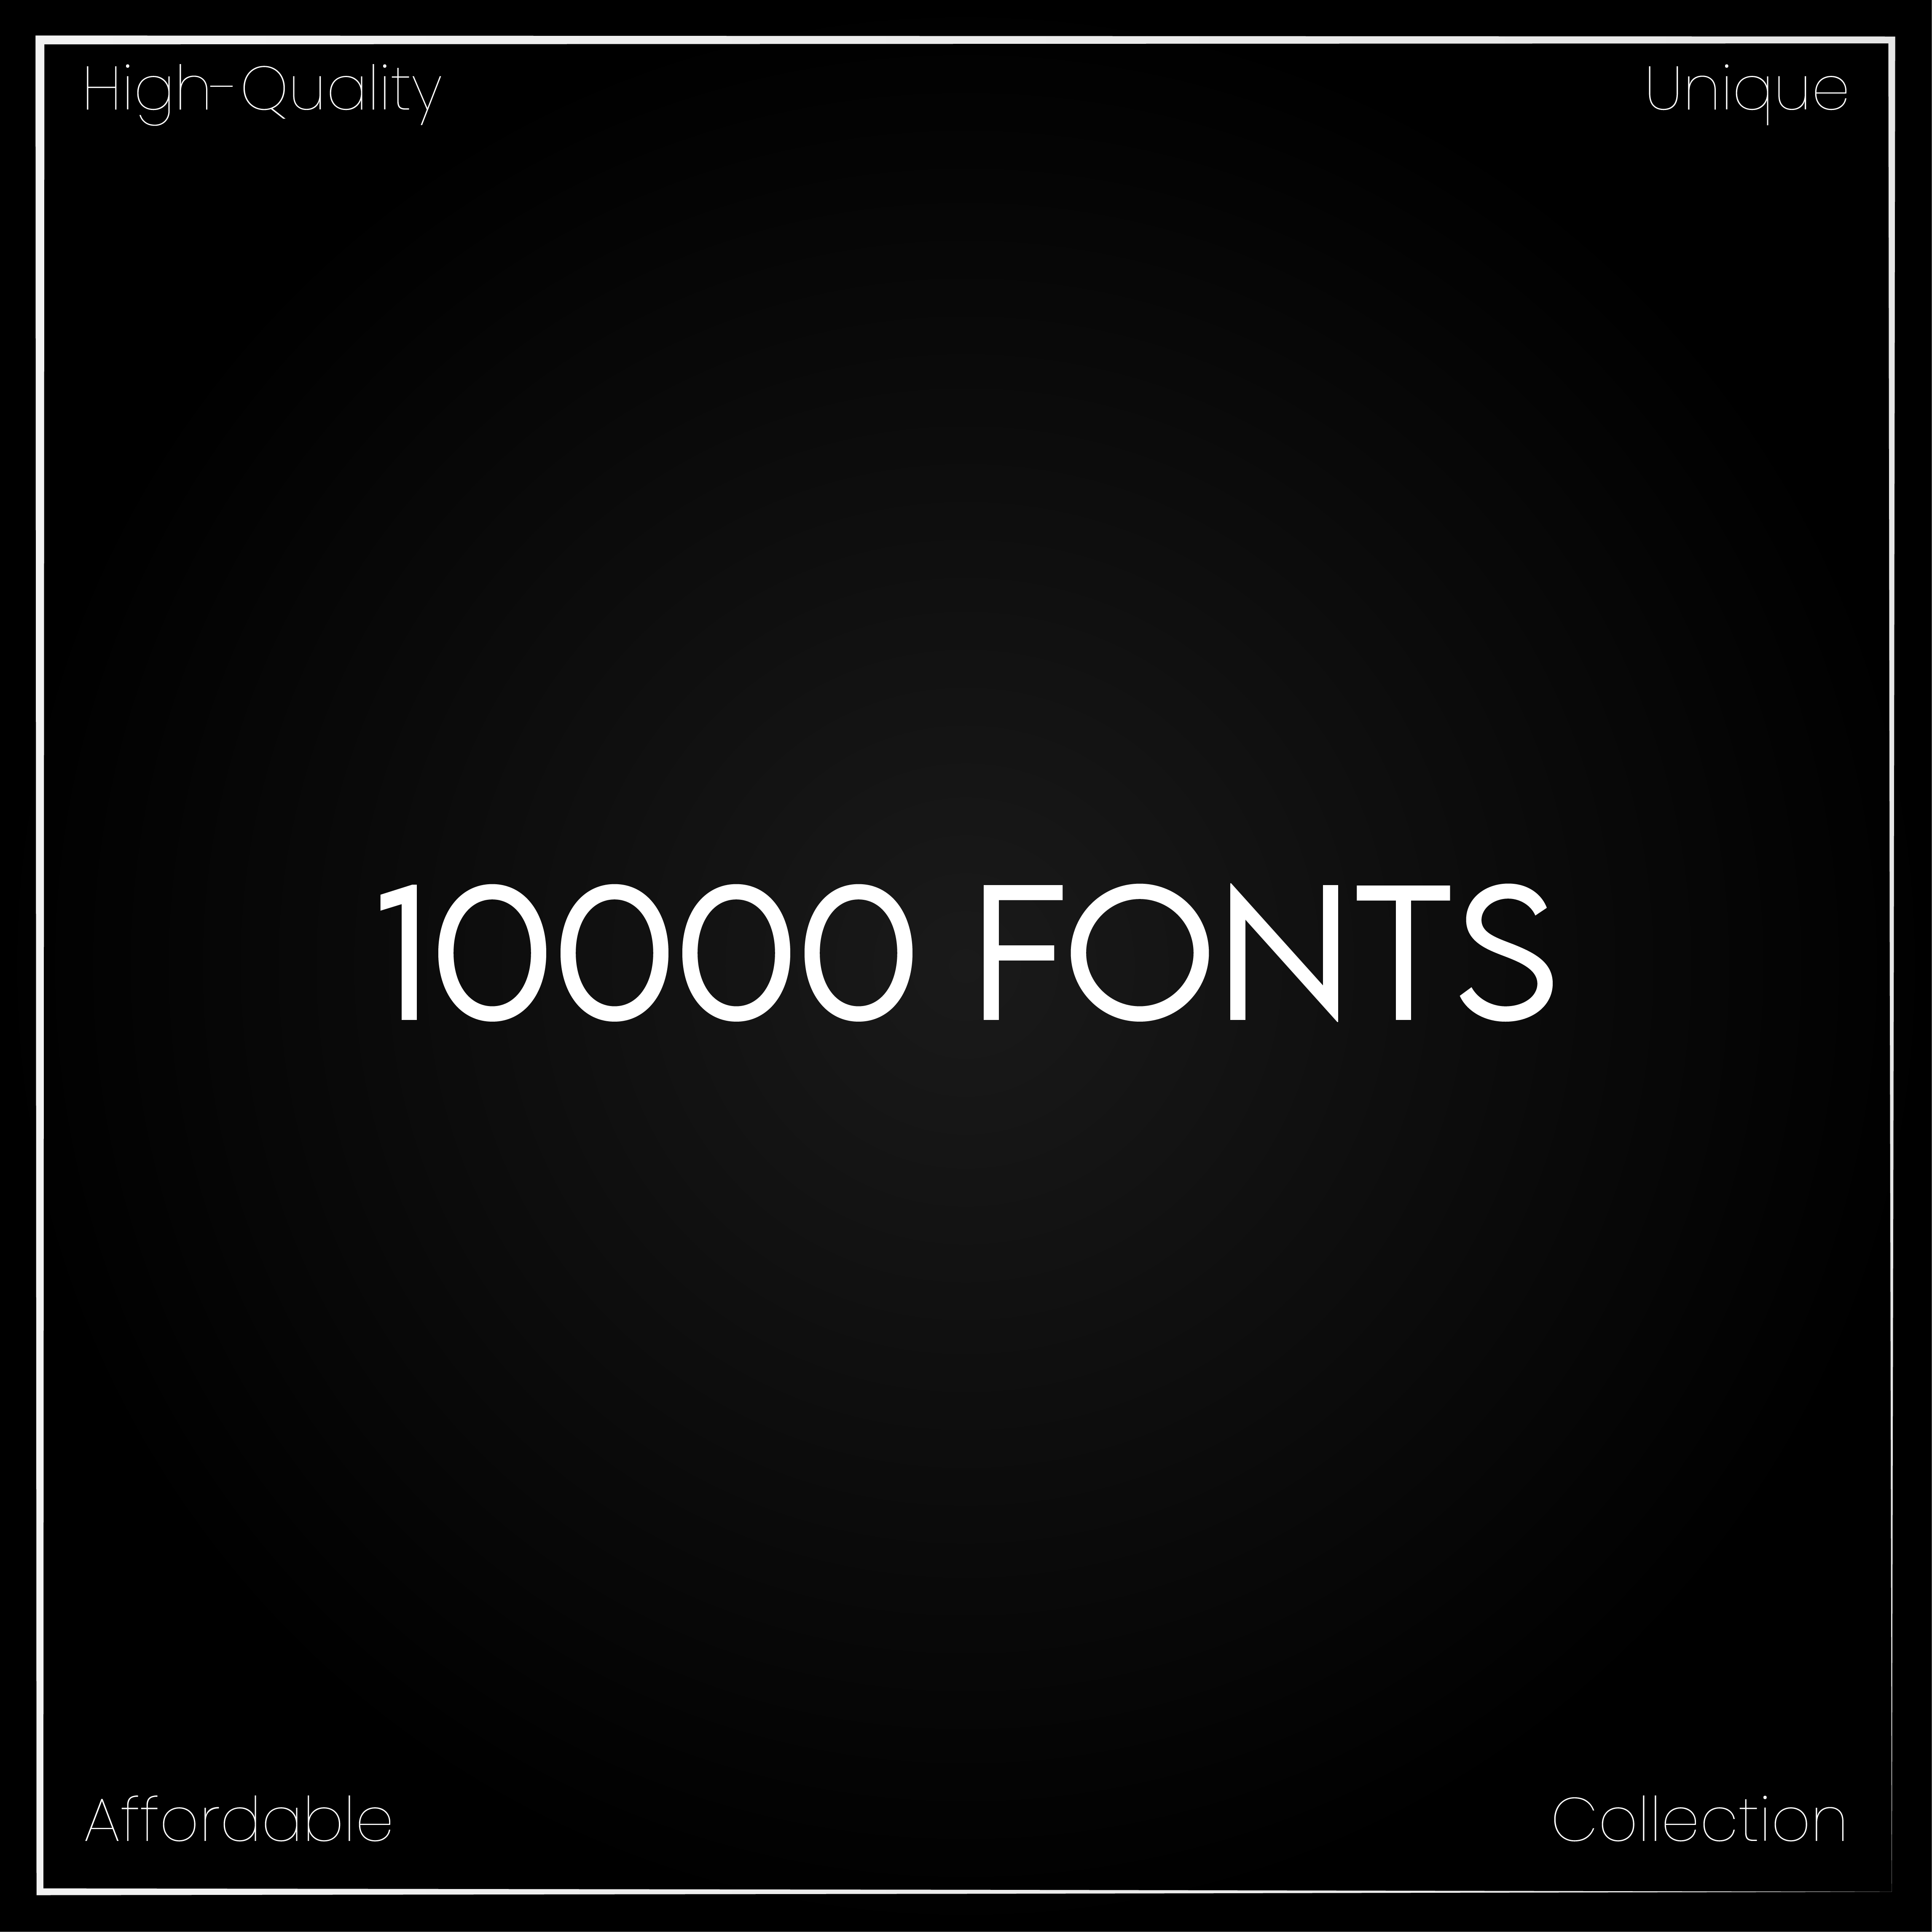 10,000 High-Quality Fonts Set | Unique and Affordable Collection cover image.